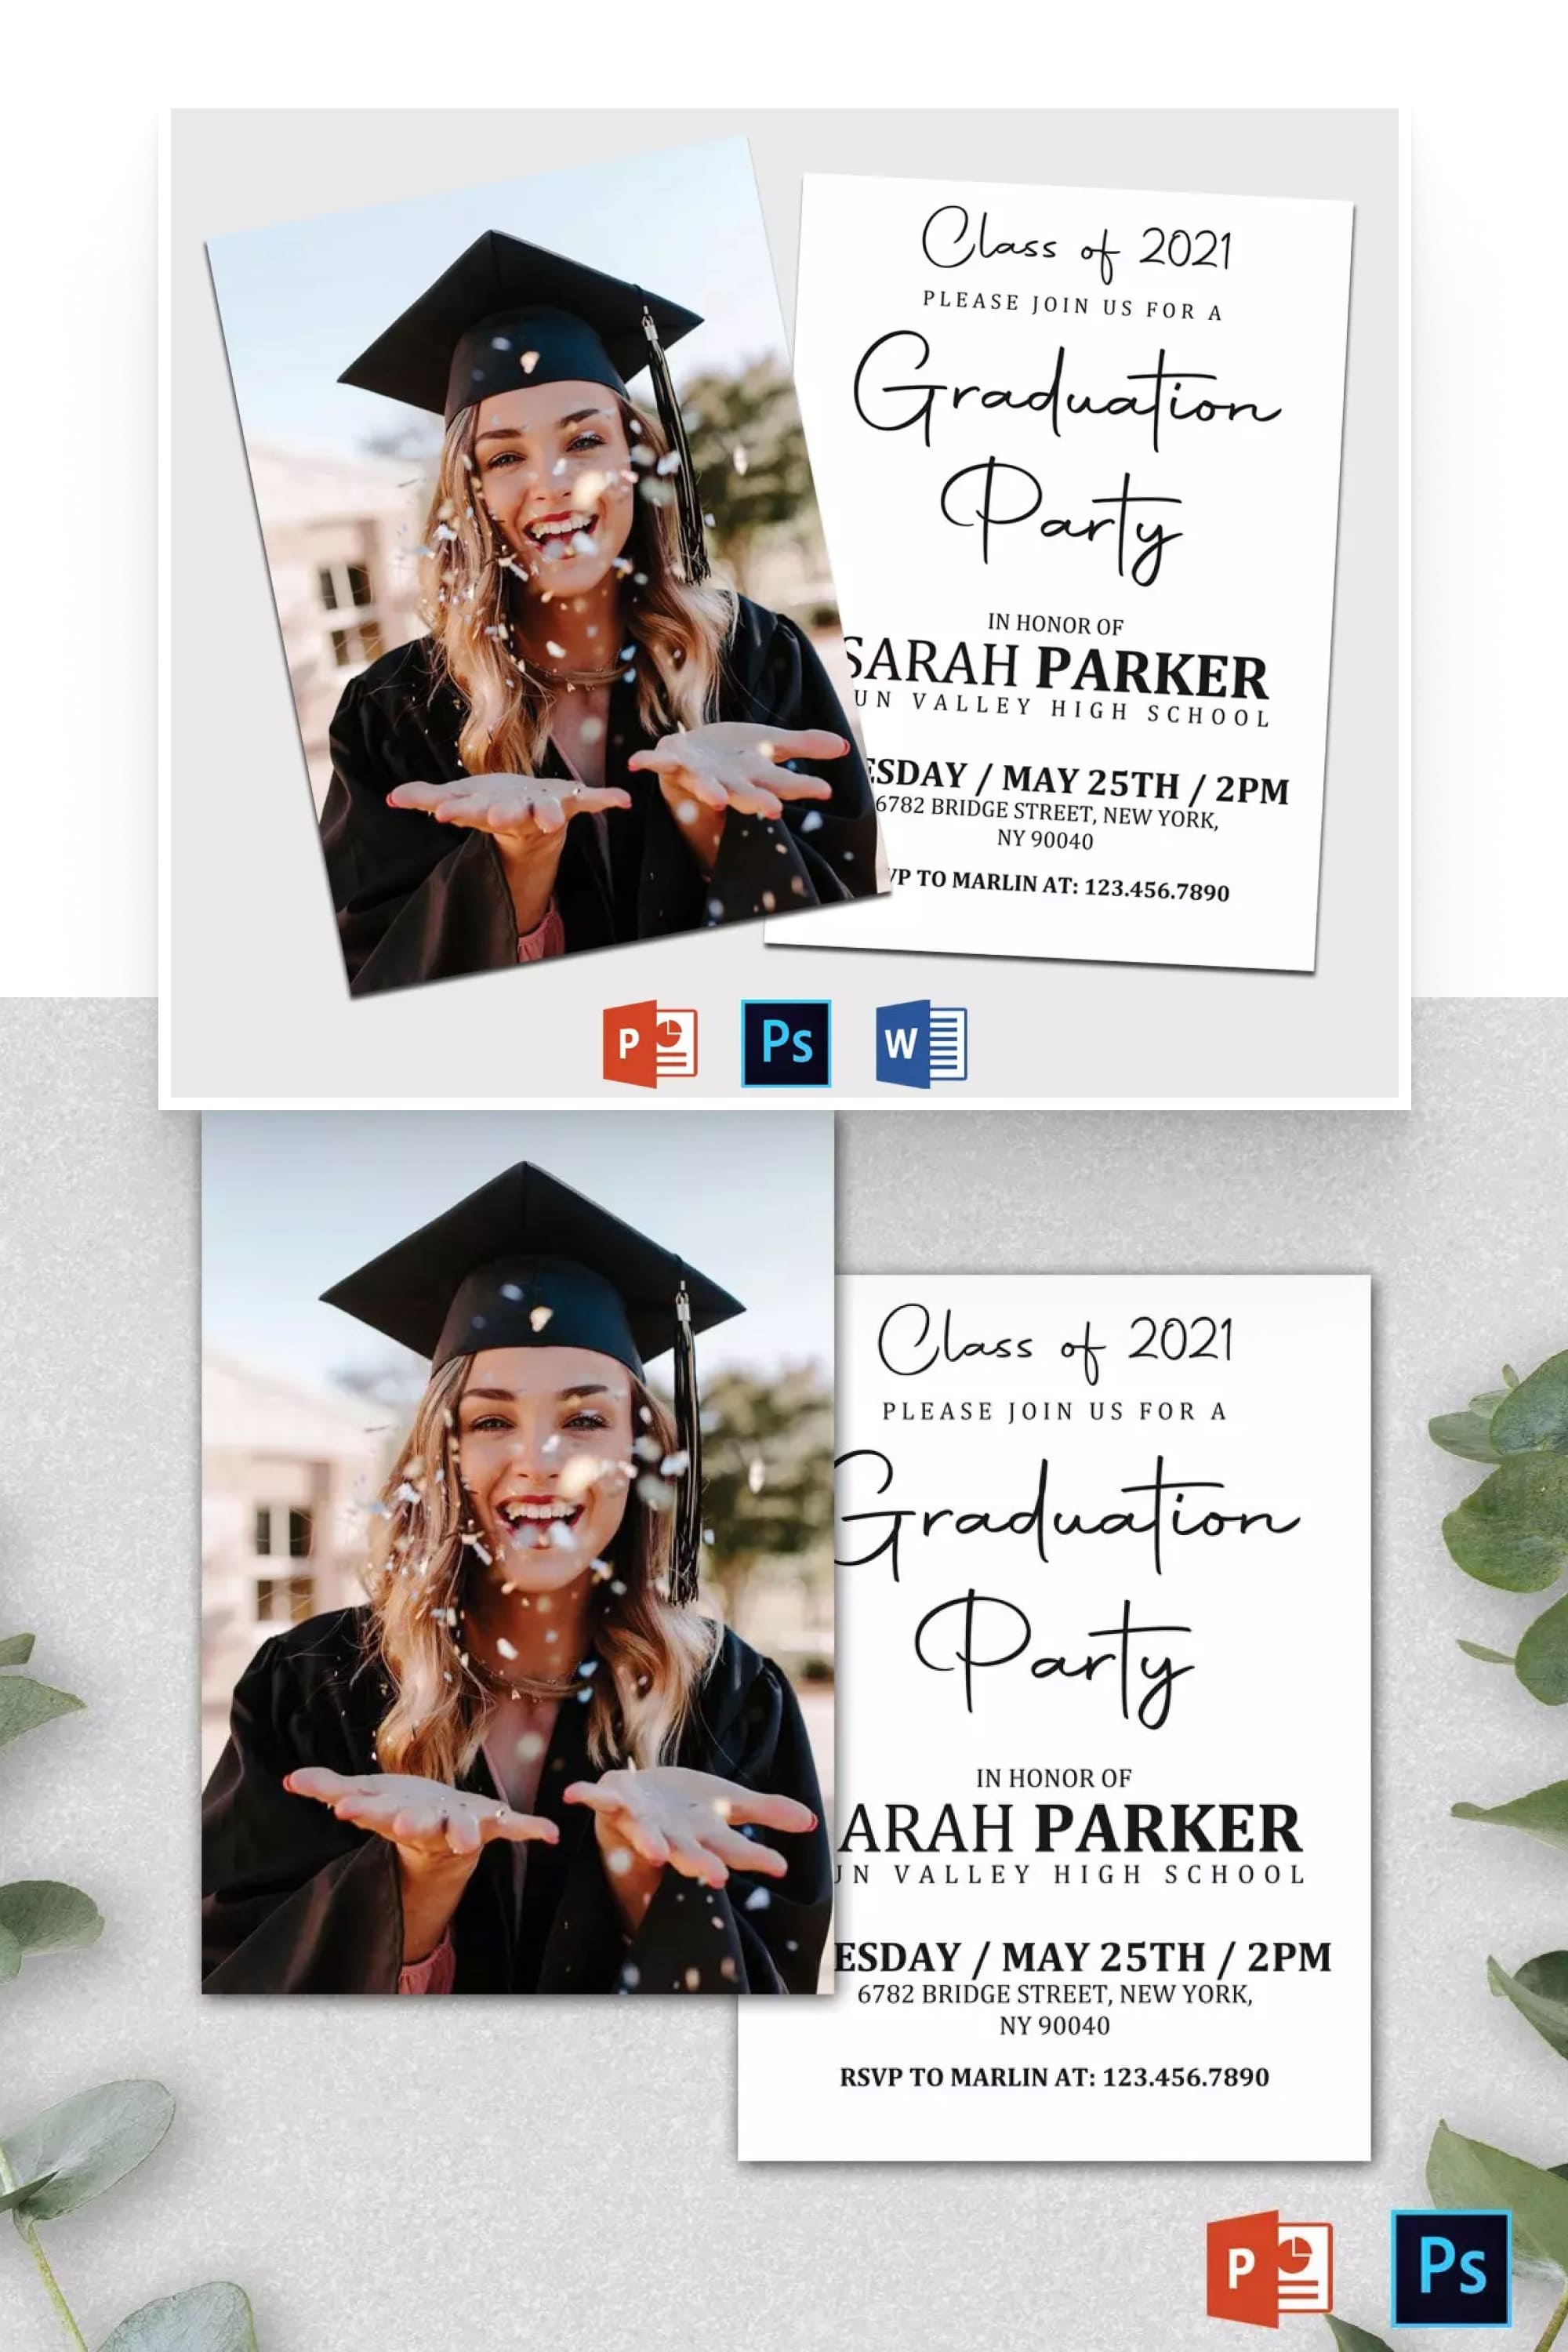 A collage of graduation invitations with a photo of a cheerful smiling girl in a confederate.